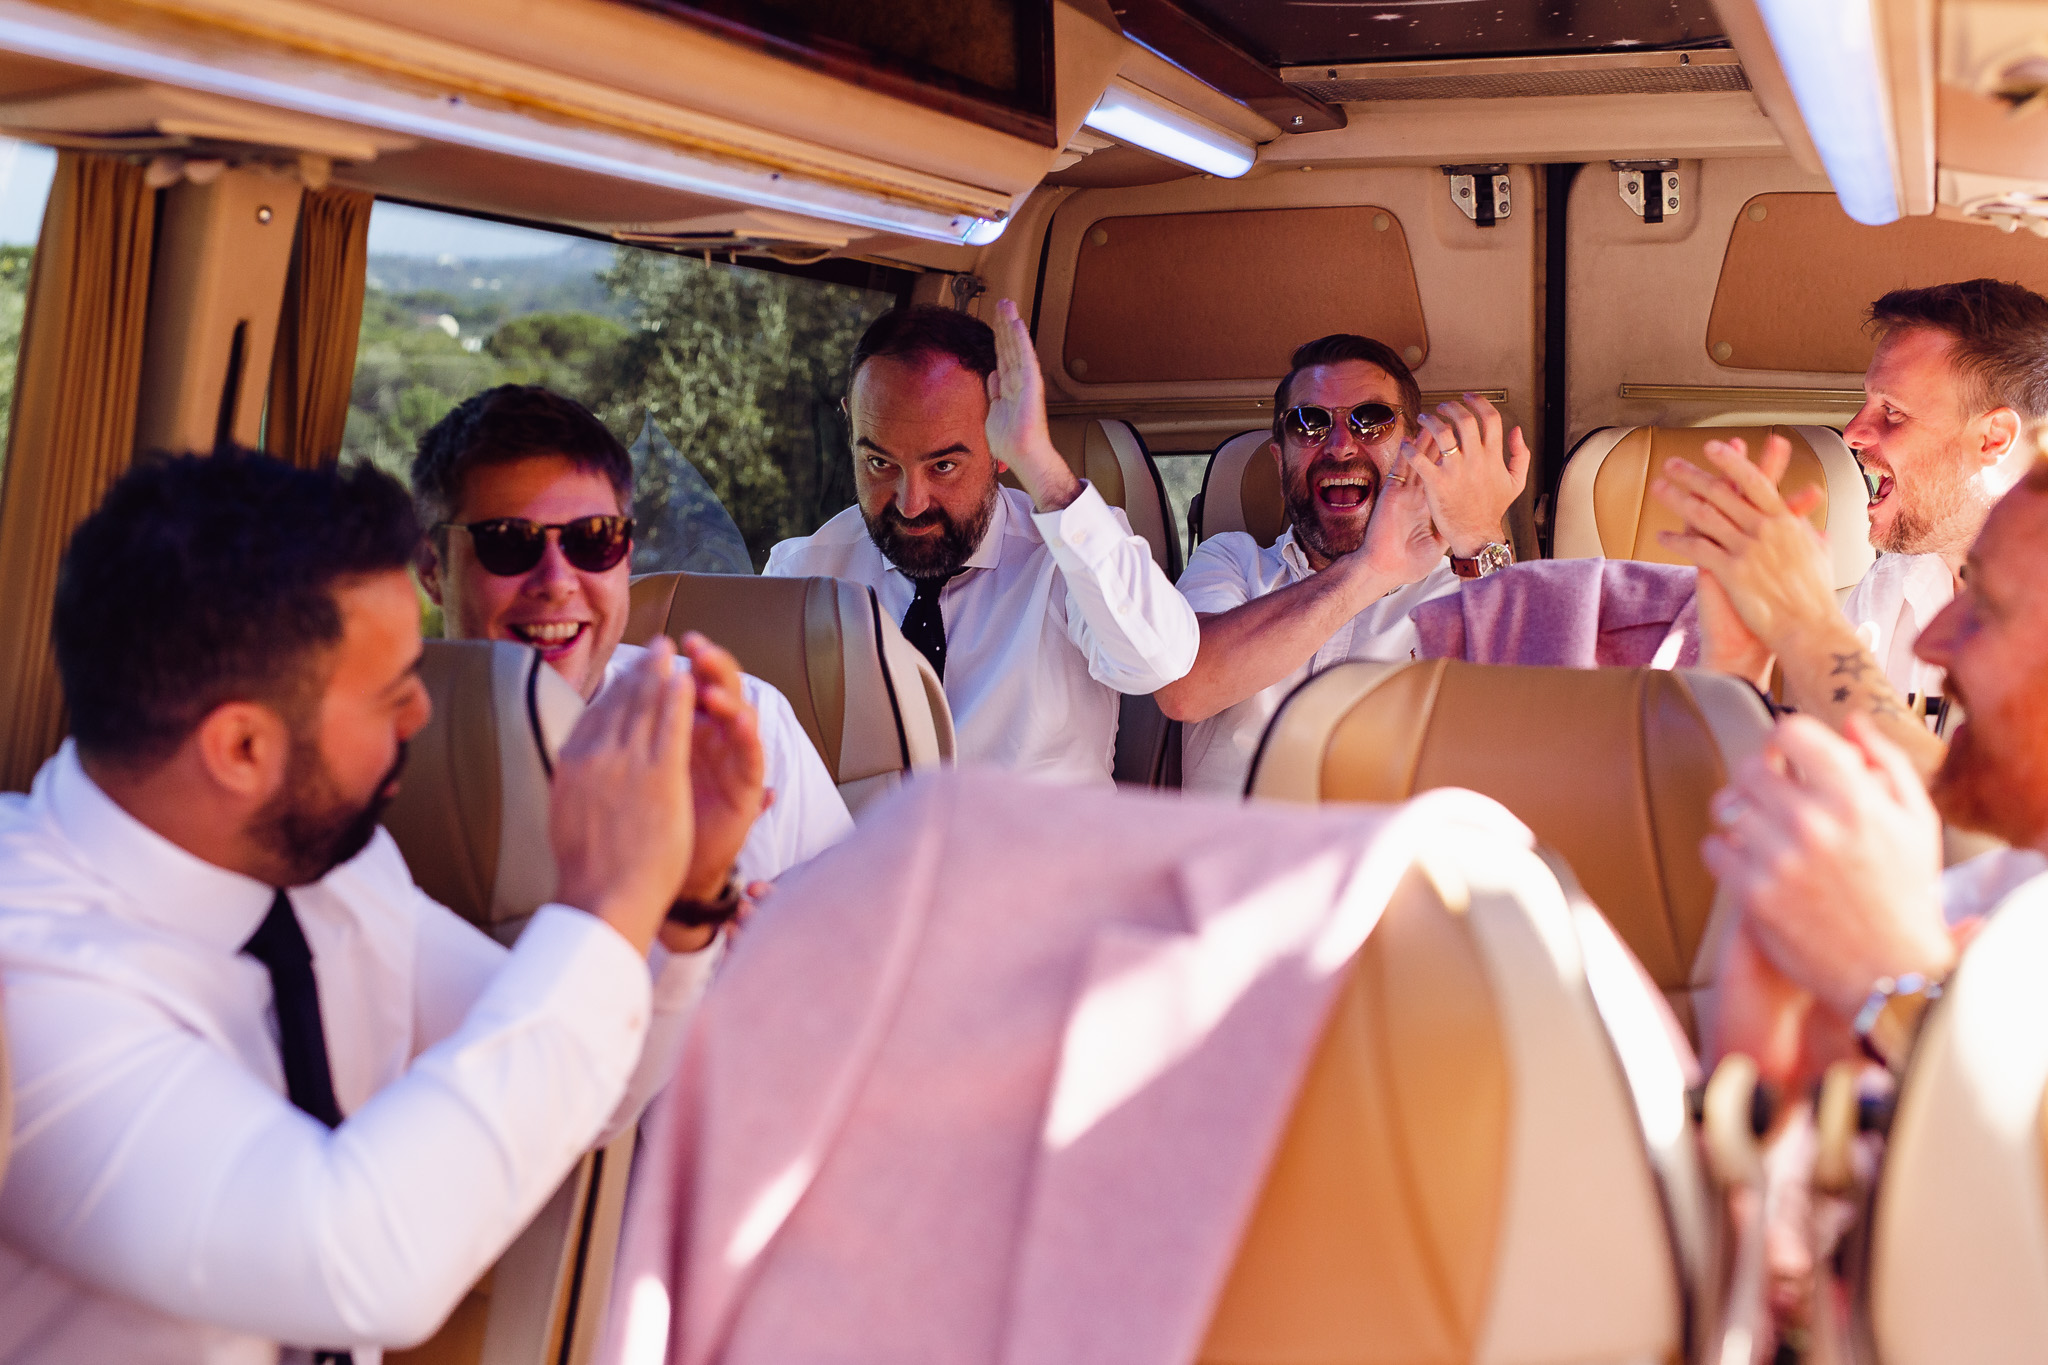 Tom waves as his groomsmen cheer him on whilst they drive to the wedding in a mini bus.